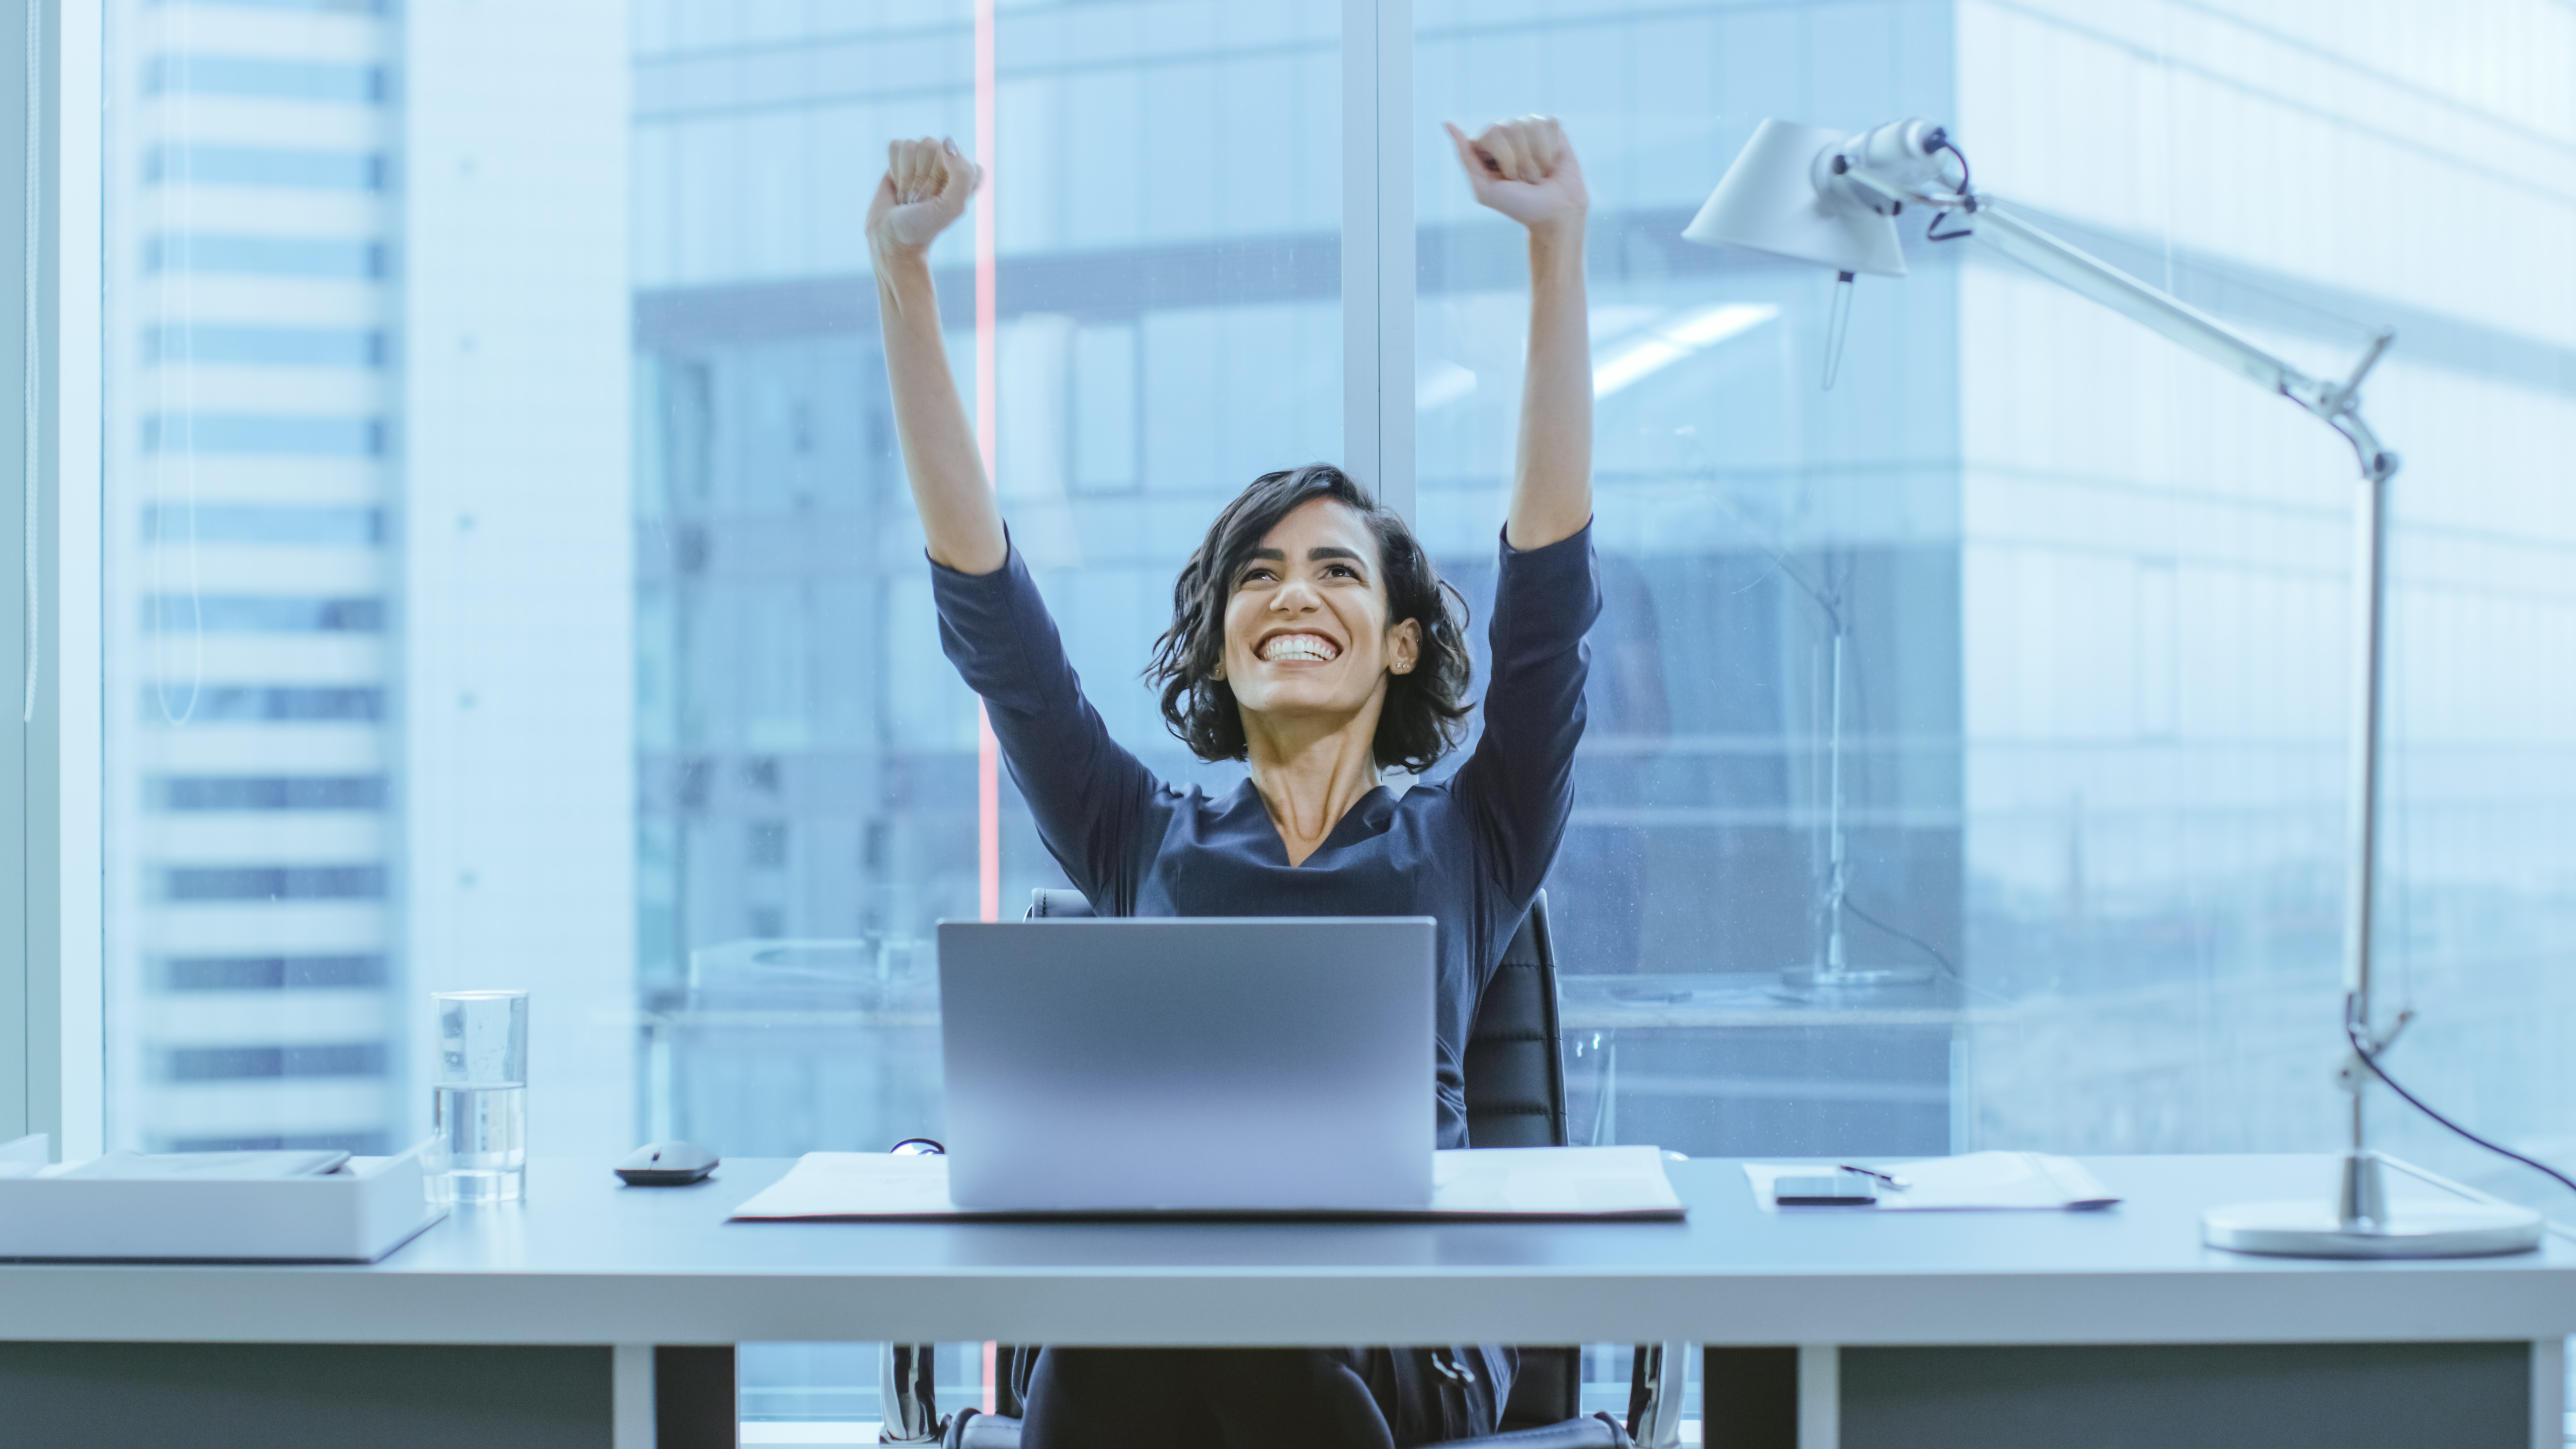 Shot of the Beautiful Businesswoman Sitting at Her Office Desk, Raising Her Arms in a Celebration of a Successful Job Promotion.